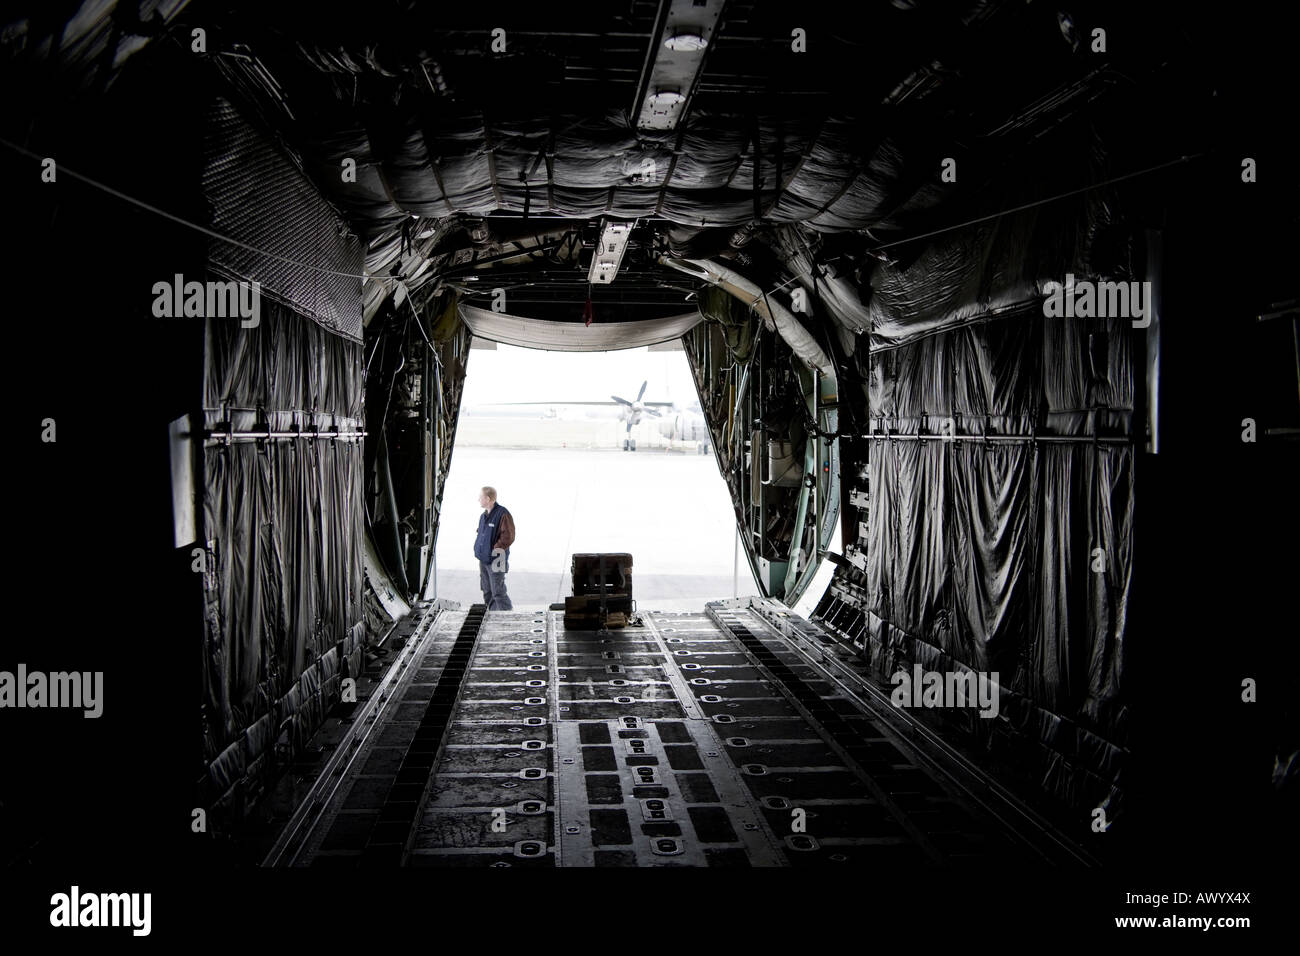 inside of a military transport aircraft Stock Photo